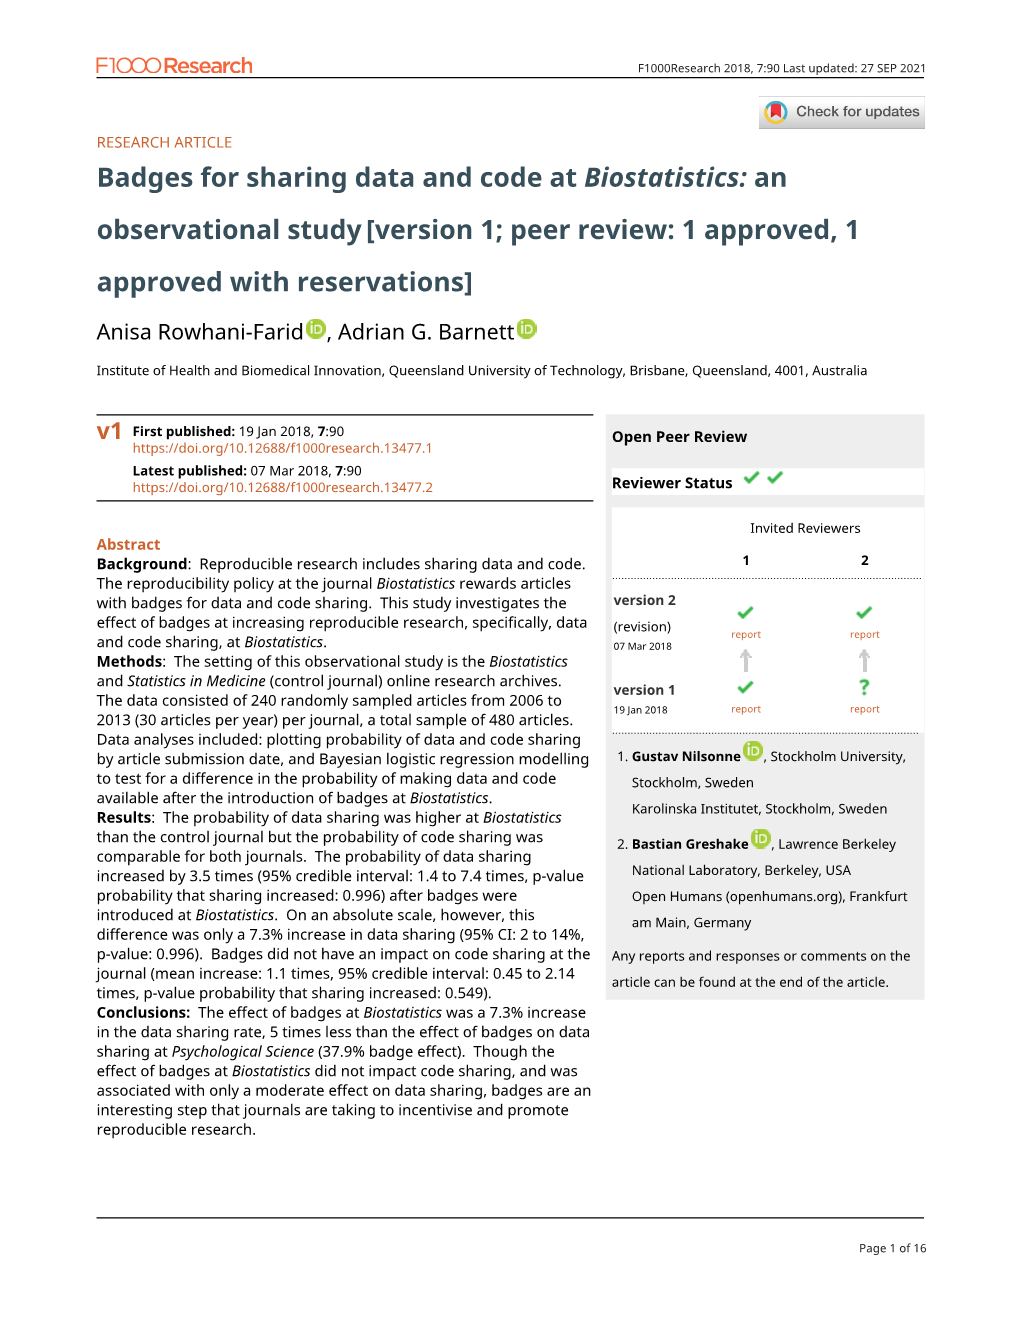 Badges for Sharing Data and Code at Biostatistics: an Observational Study [Version 1; Peer Review: 1 Approved, 1 Approved with Reservations]